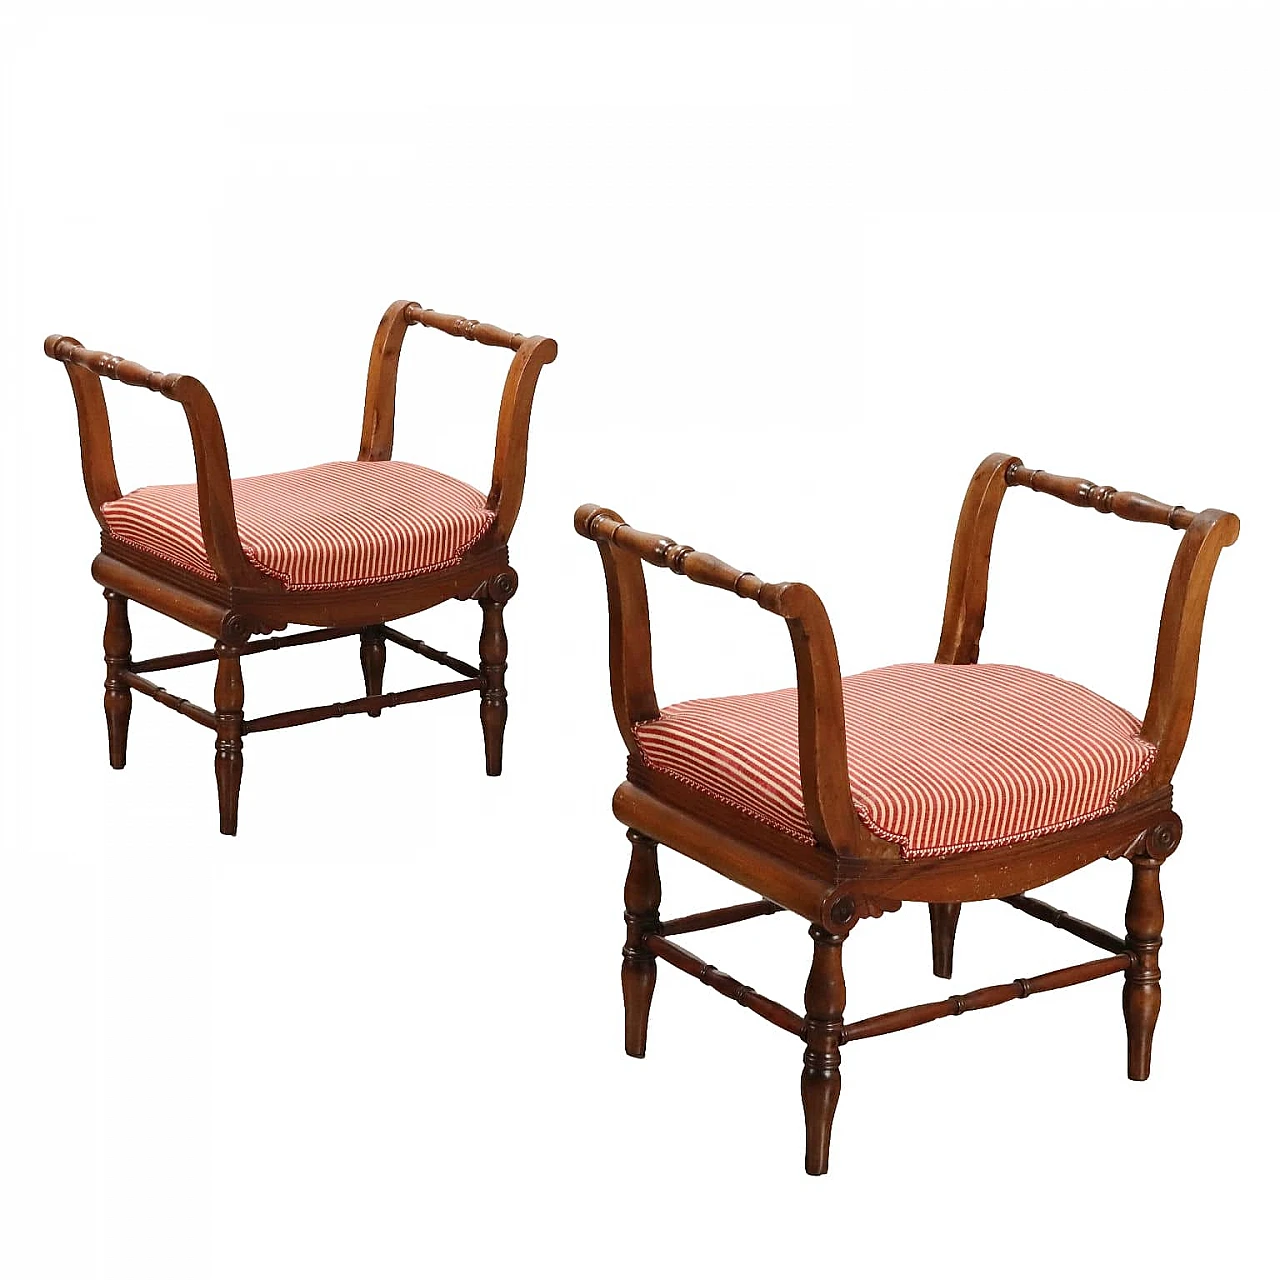 Pair of walnut benches with wavy arms & padded seat, 19th century 1